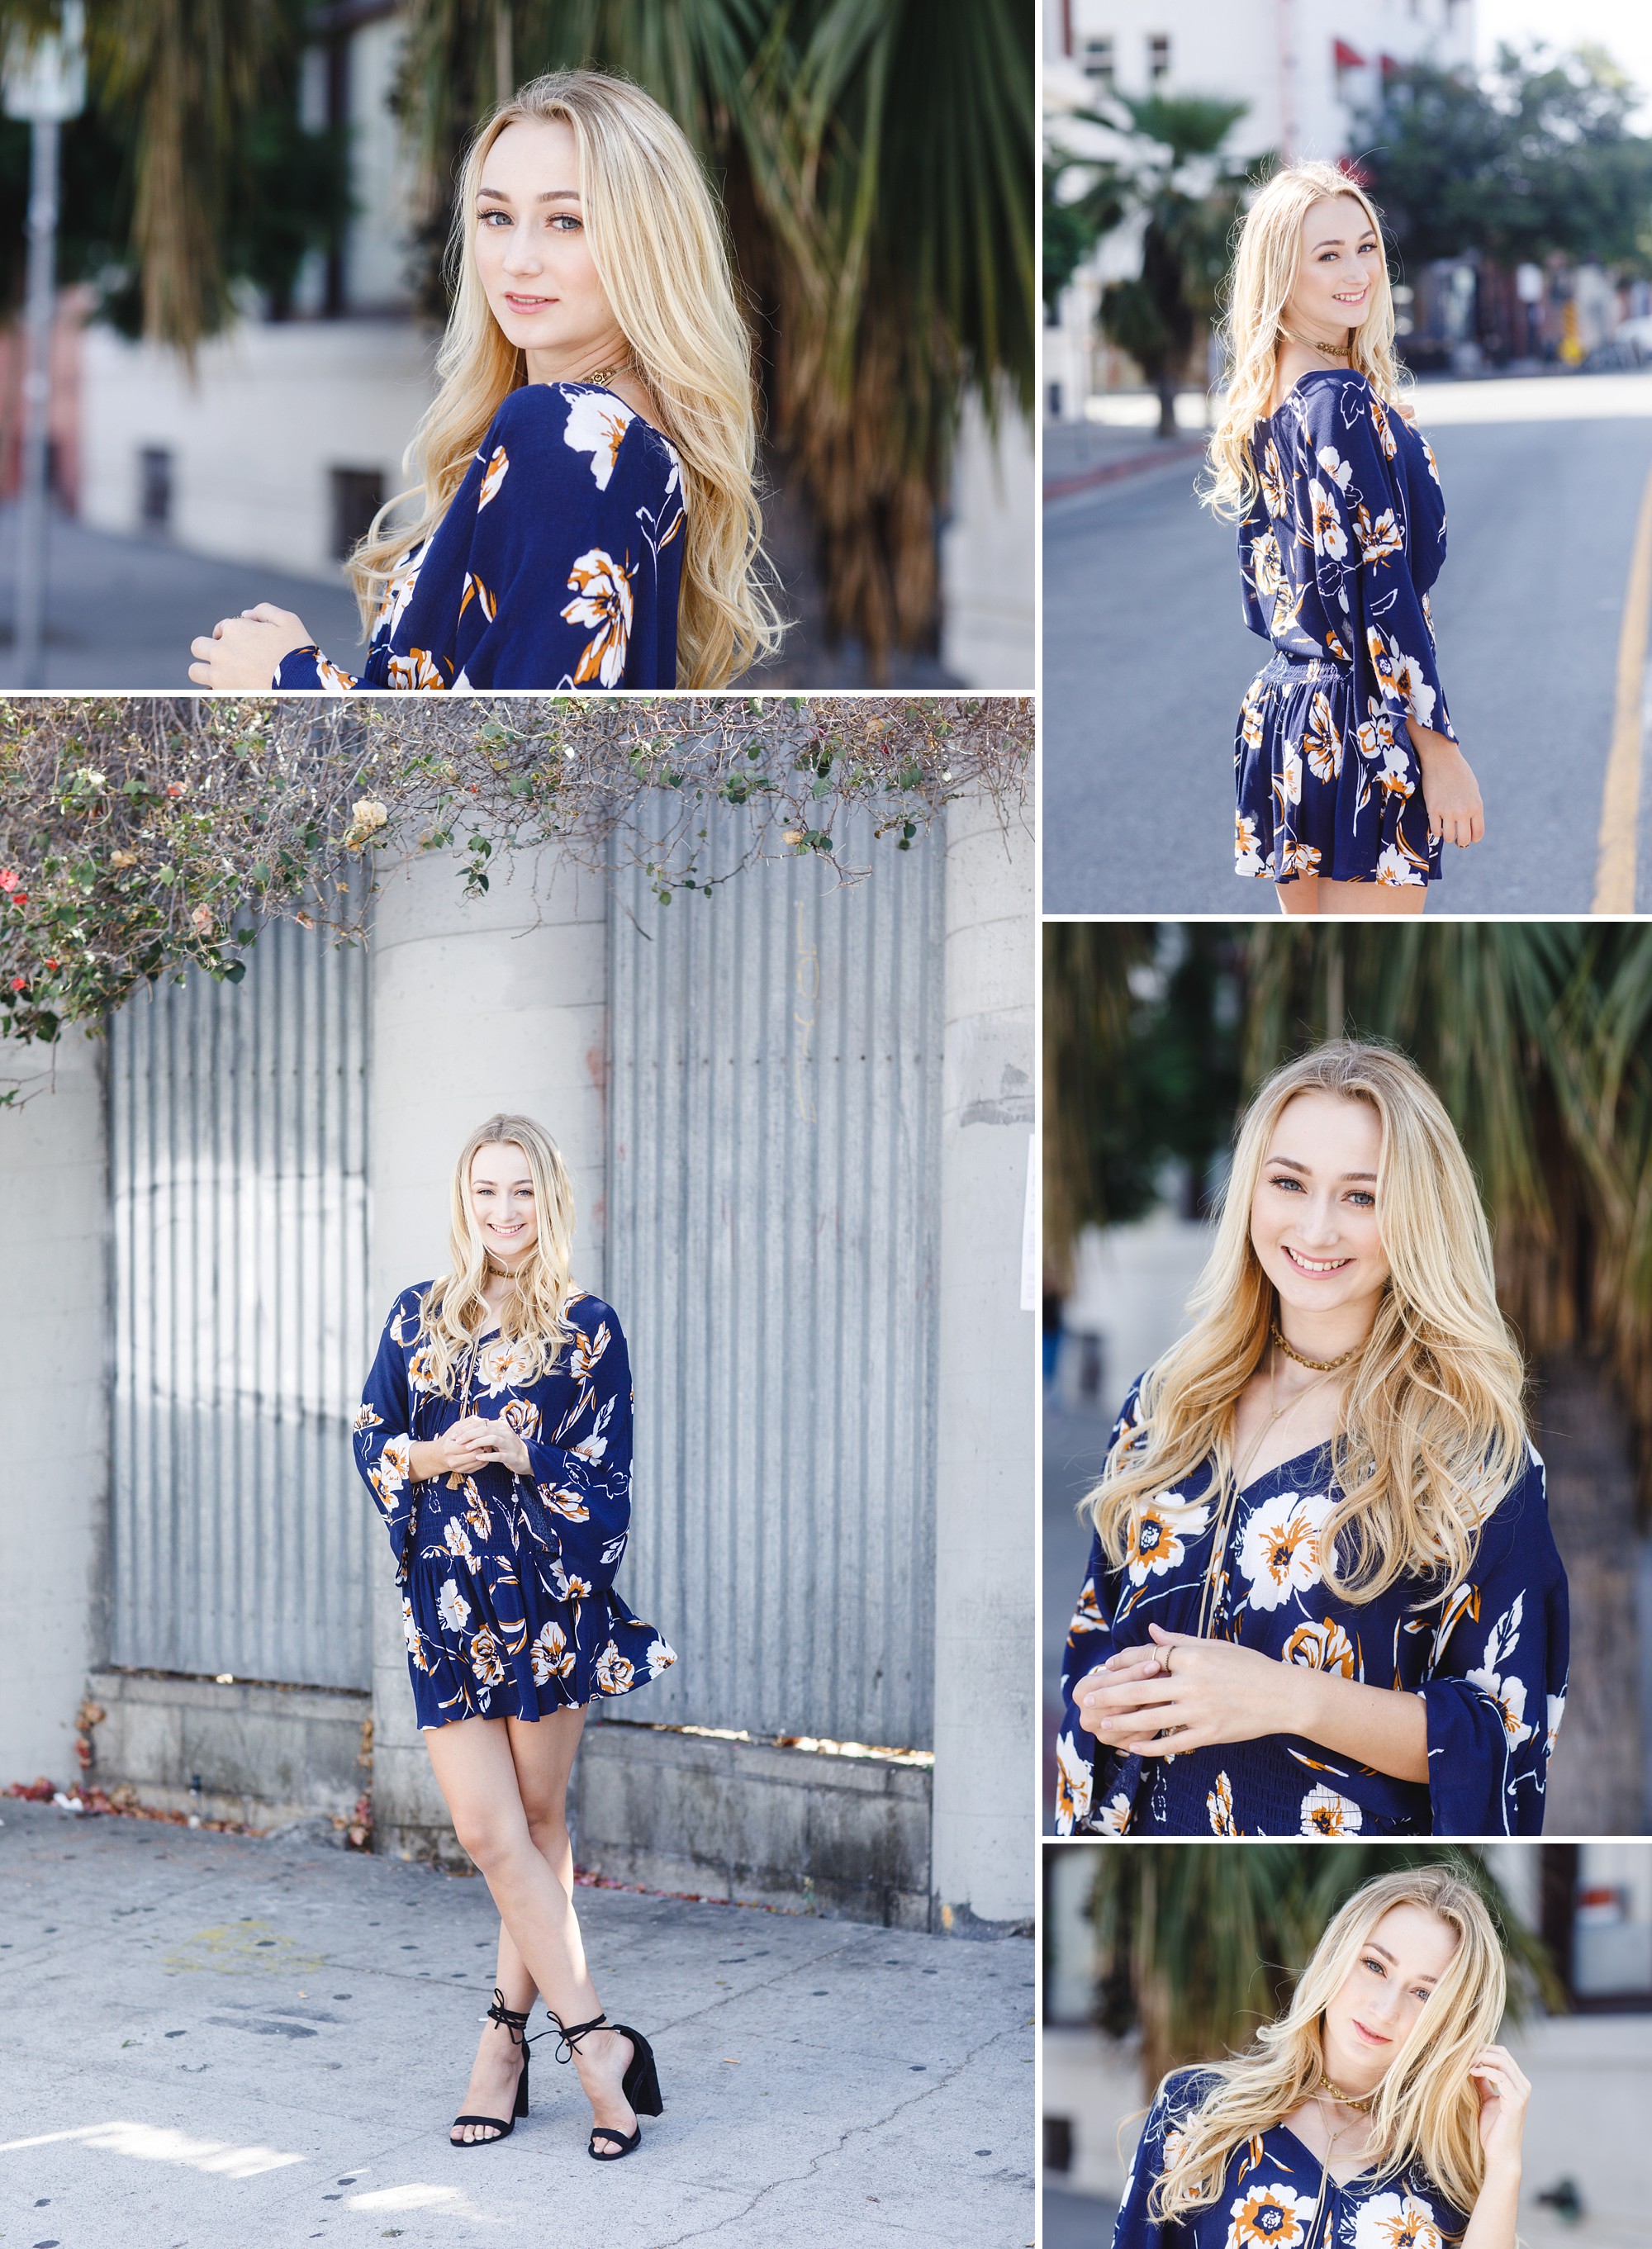 Beautiful senior photos done by Tara Rochelle Photography in urban Los Angeles